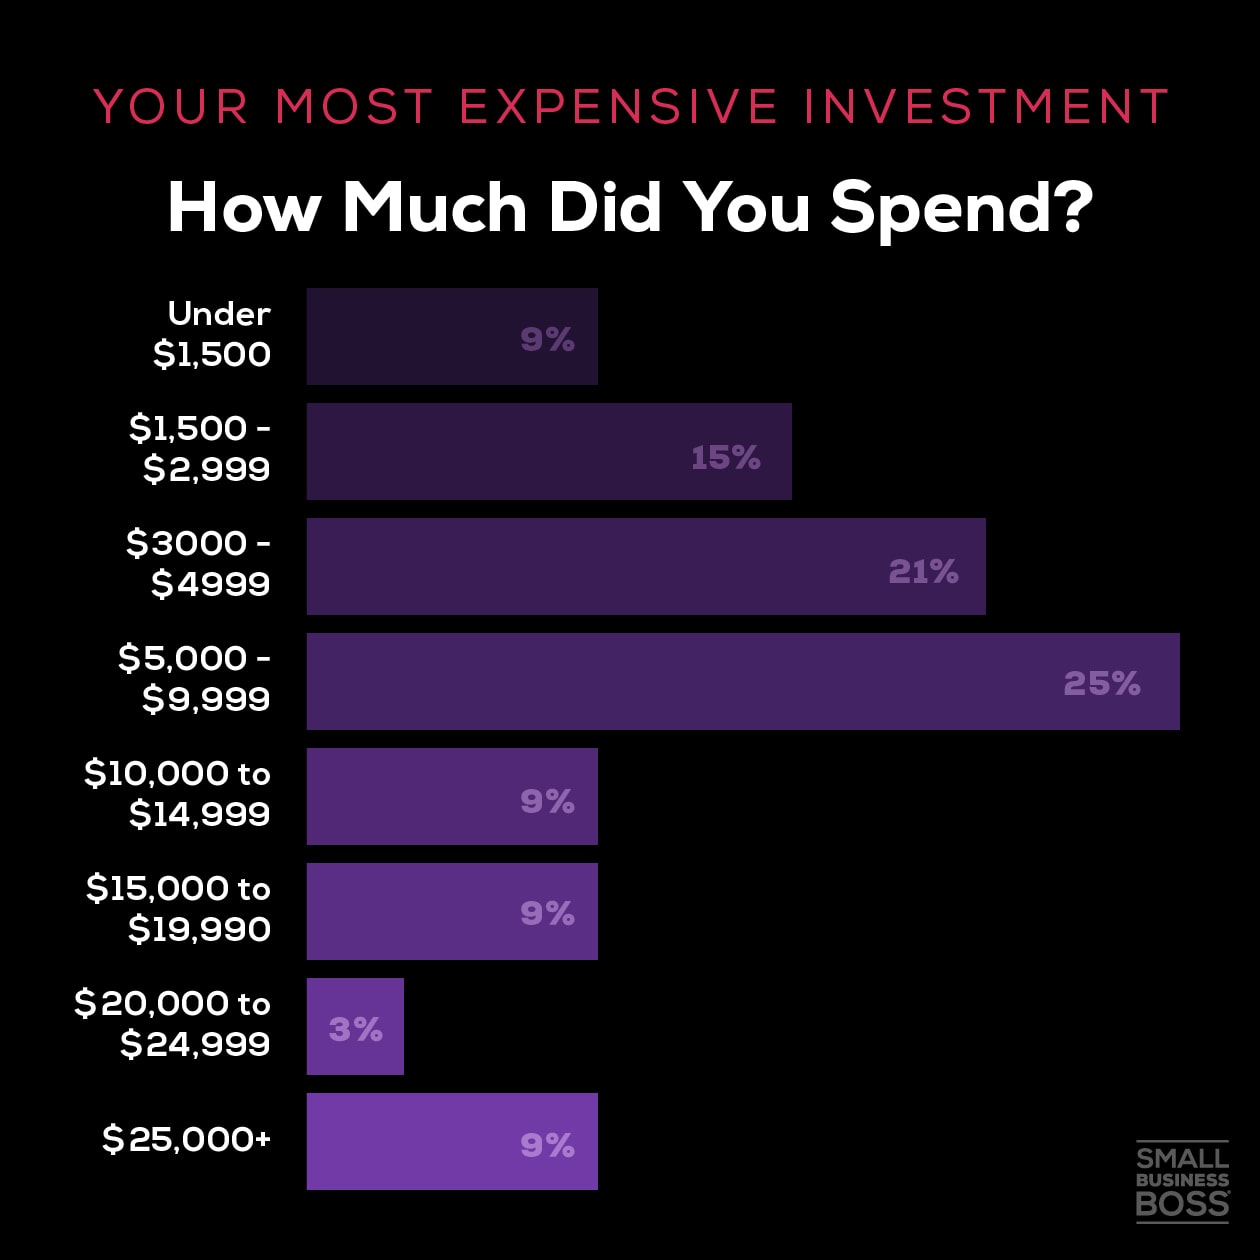 bar chart of the price for the most expensive investments